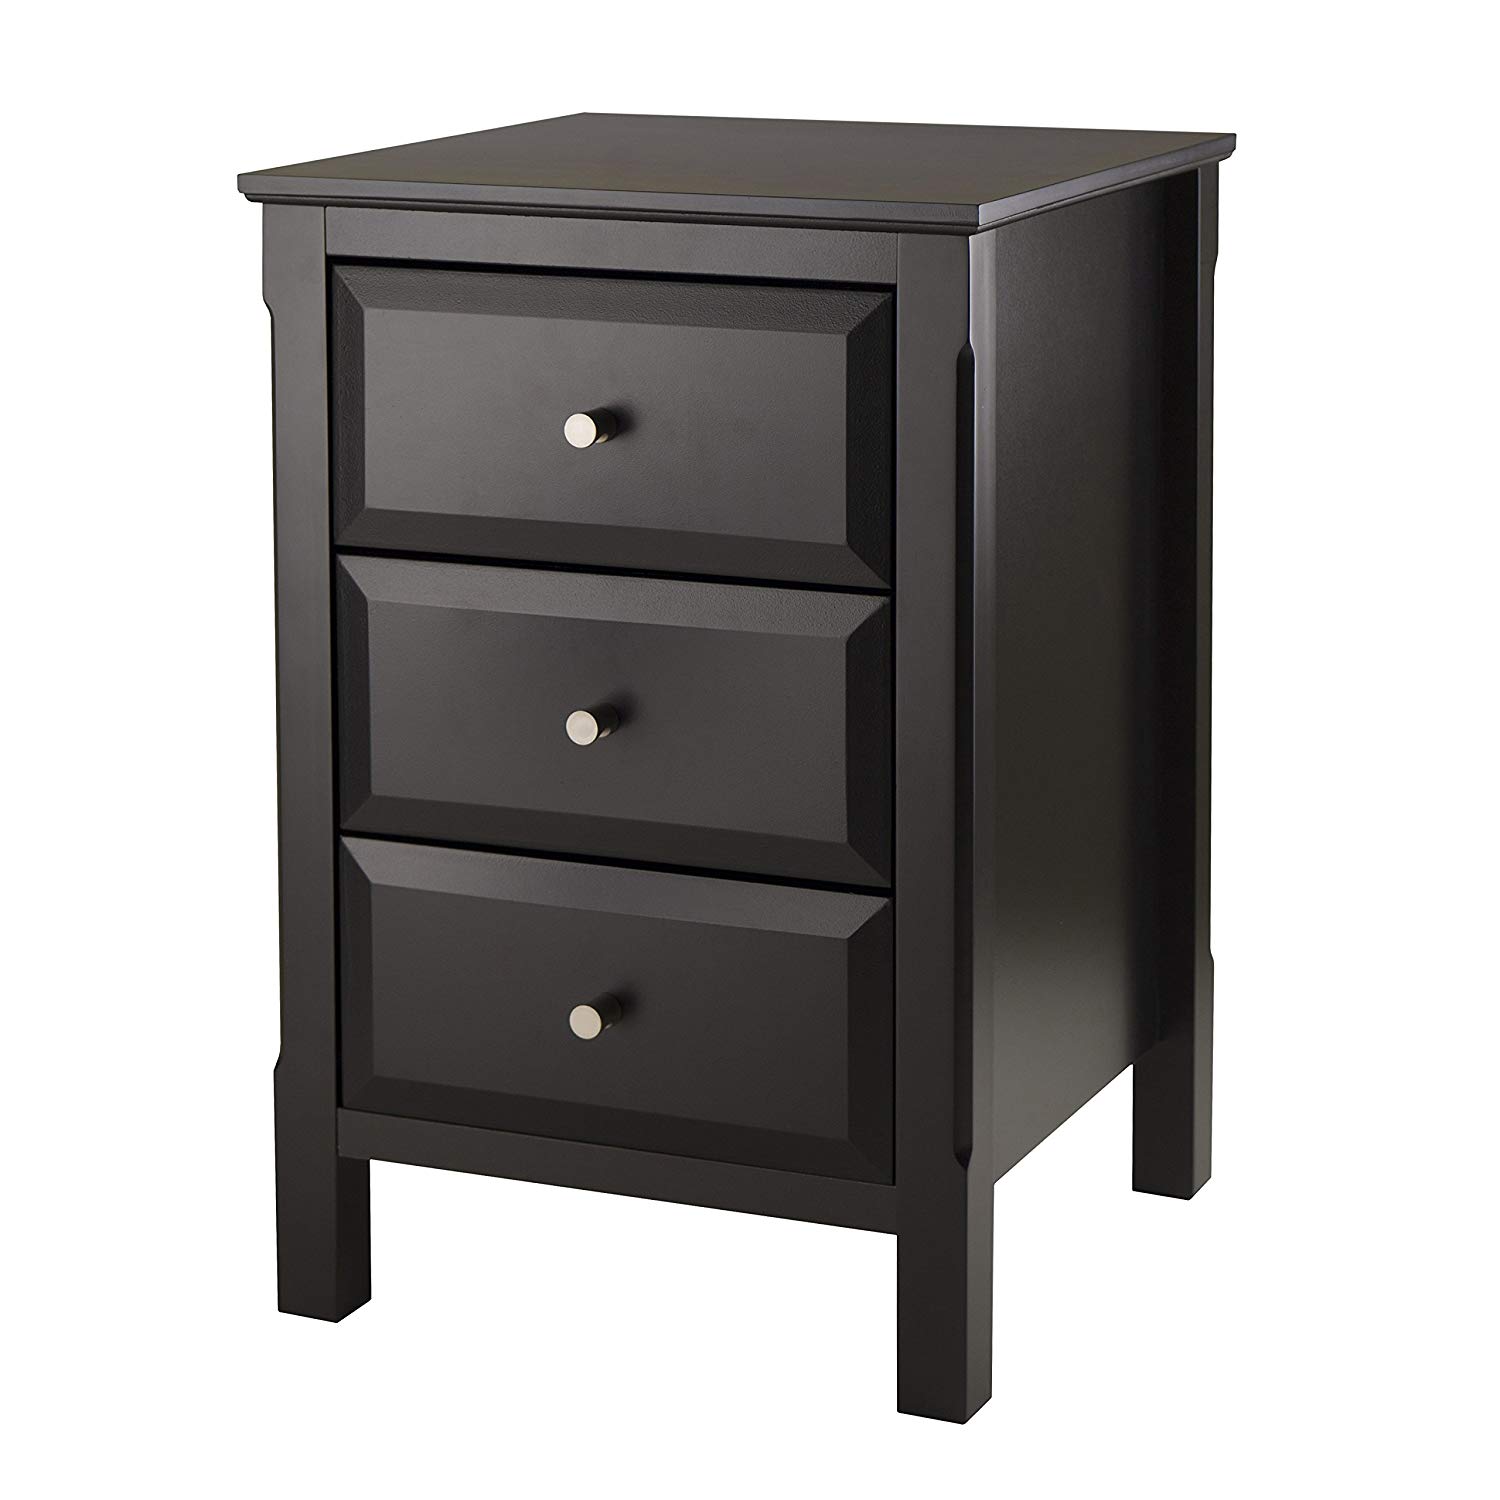 winsome timmy accent table black kitchen dining daniel with drawer finish side white counter height console bedroom end ideas patio chairs marble spindle legs perspex beautiful